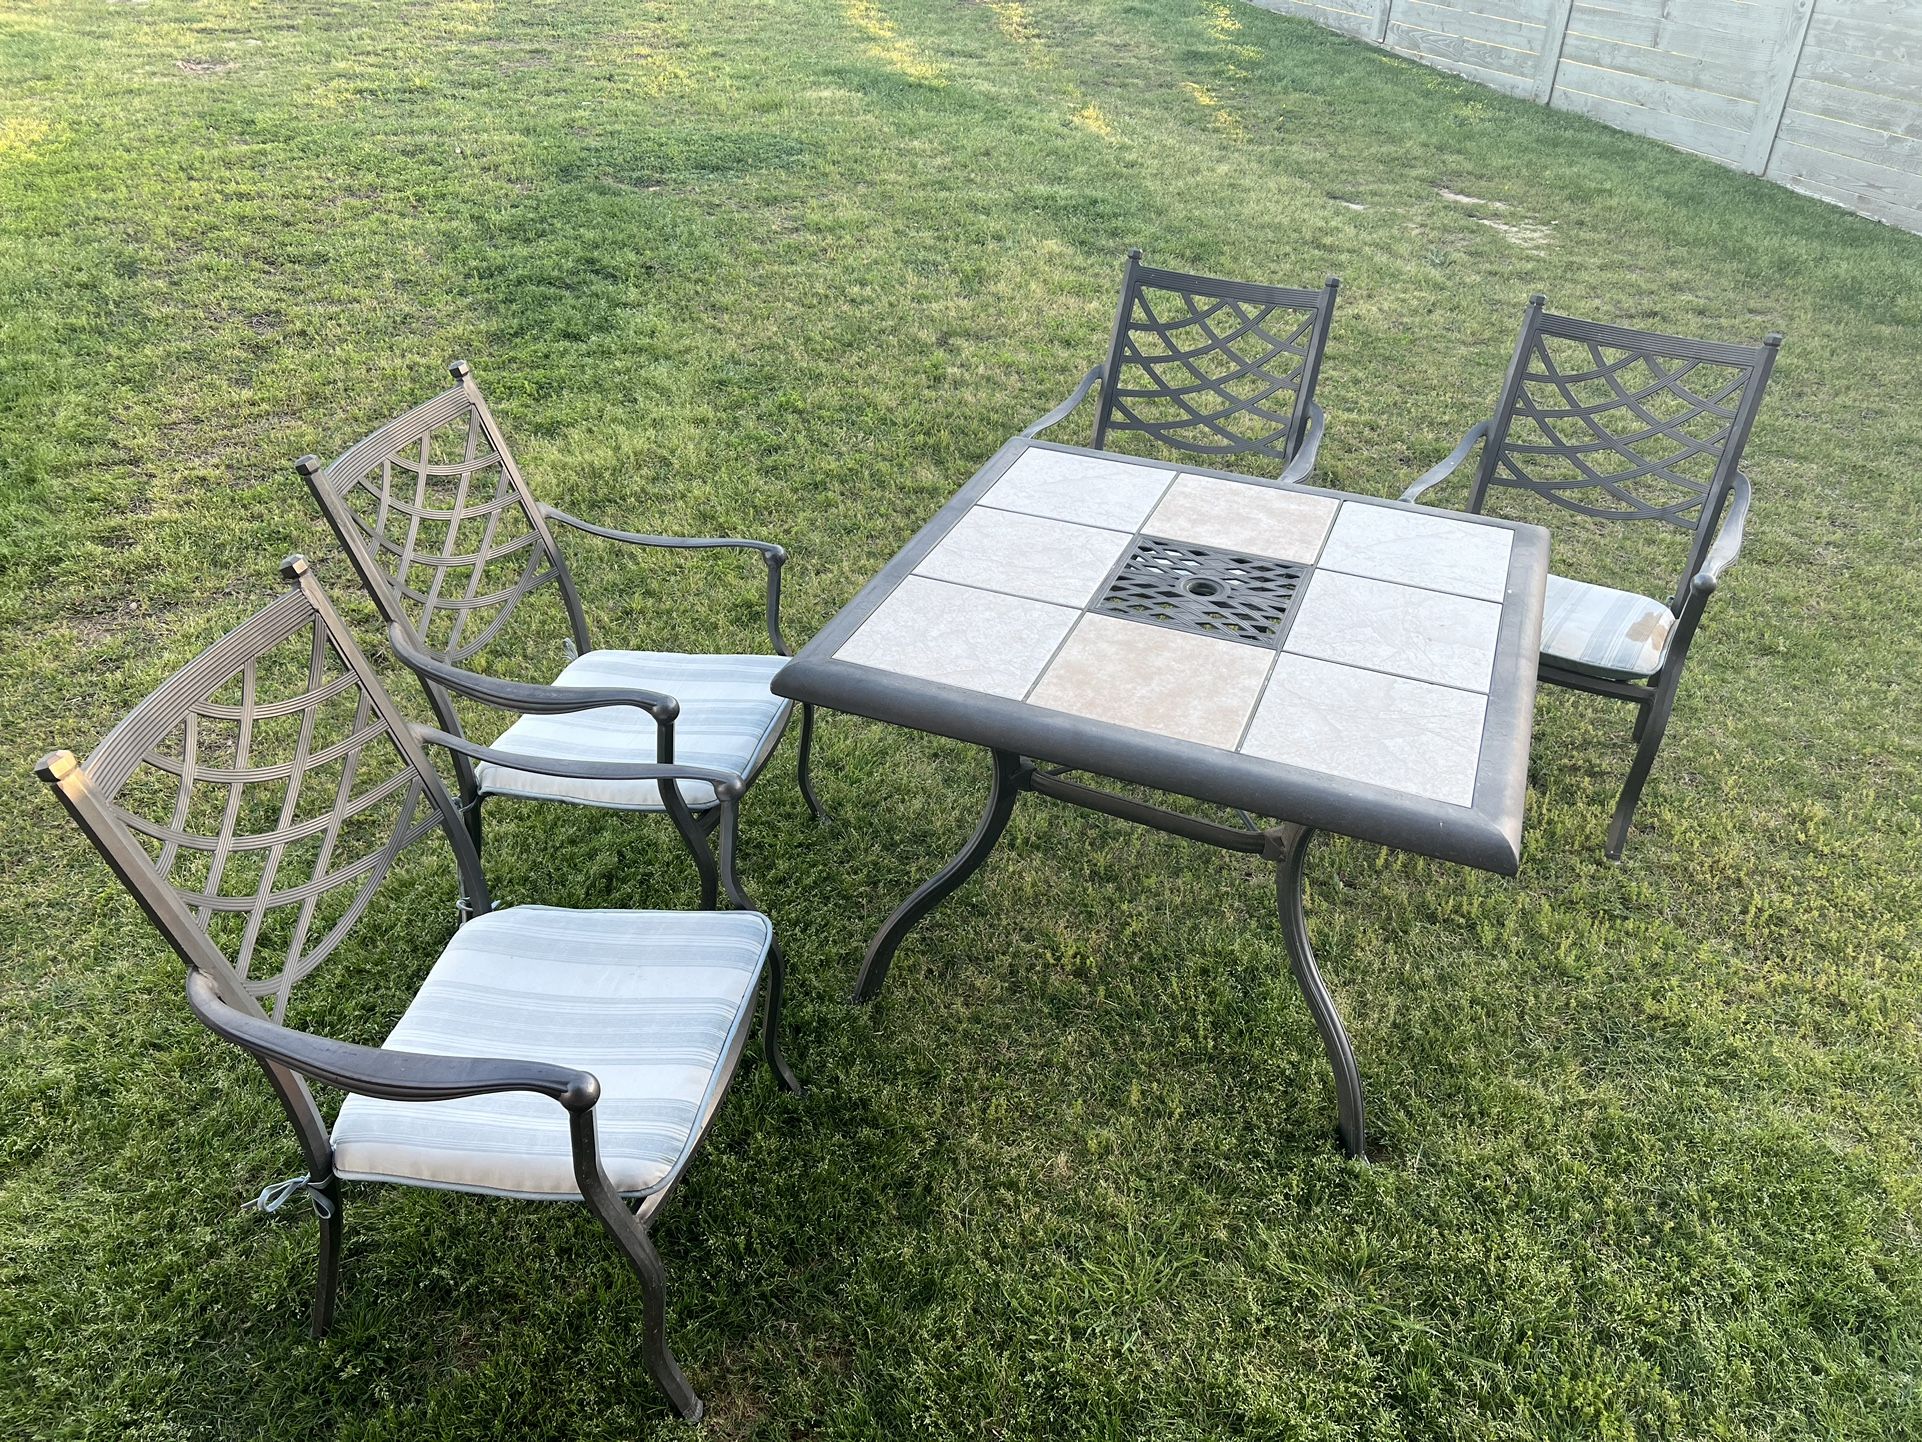 4 Chair And Table Wrought Iron Patio Furniture